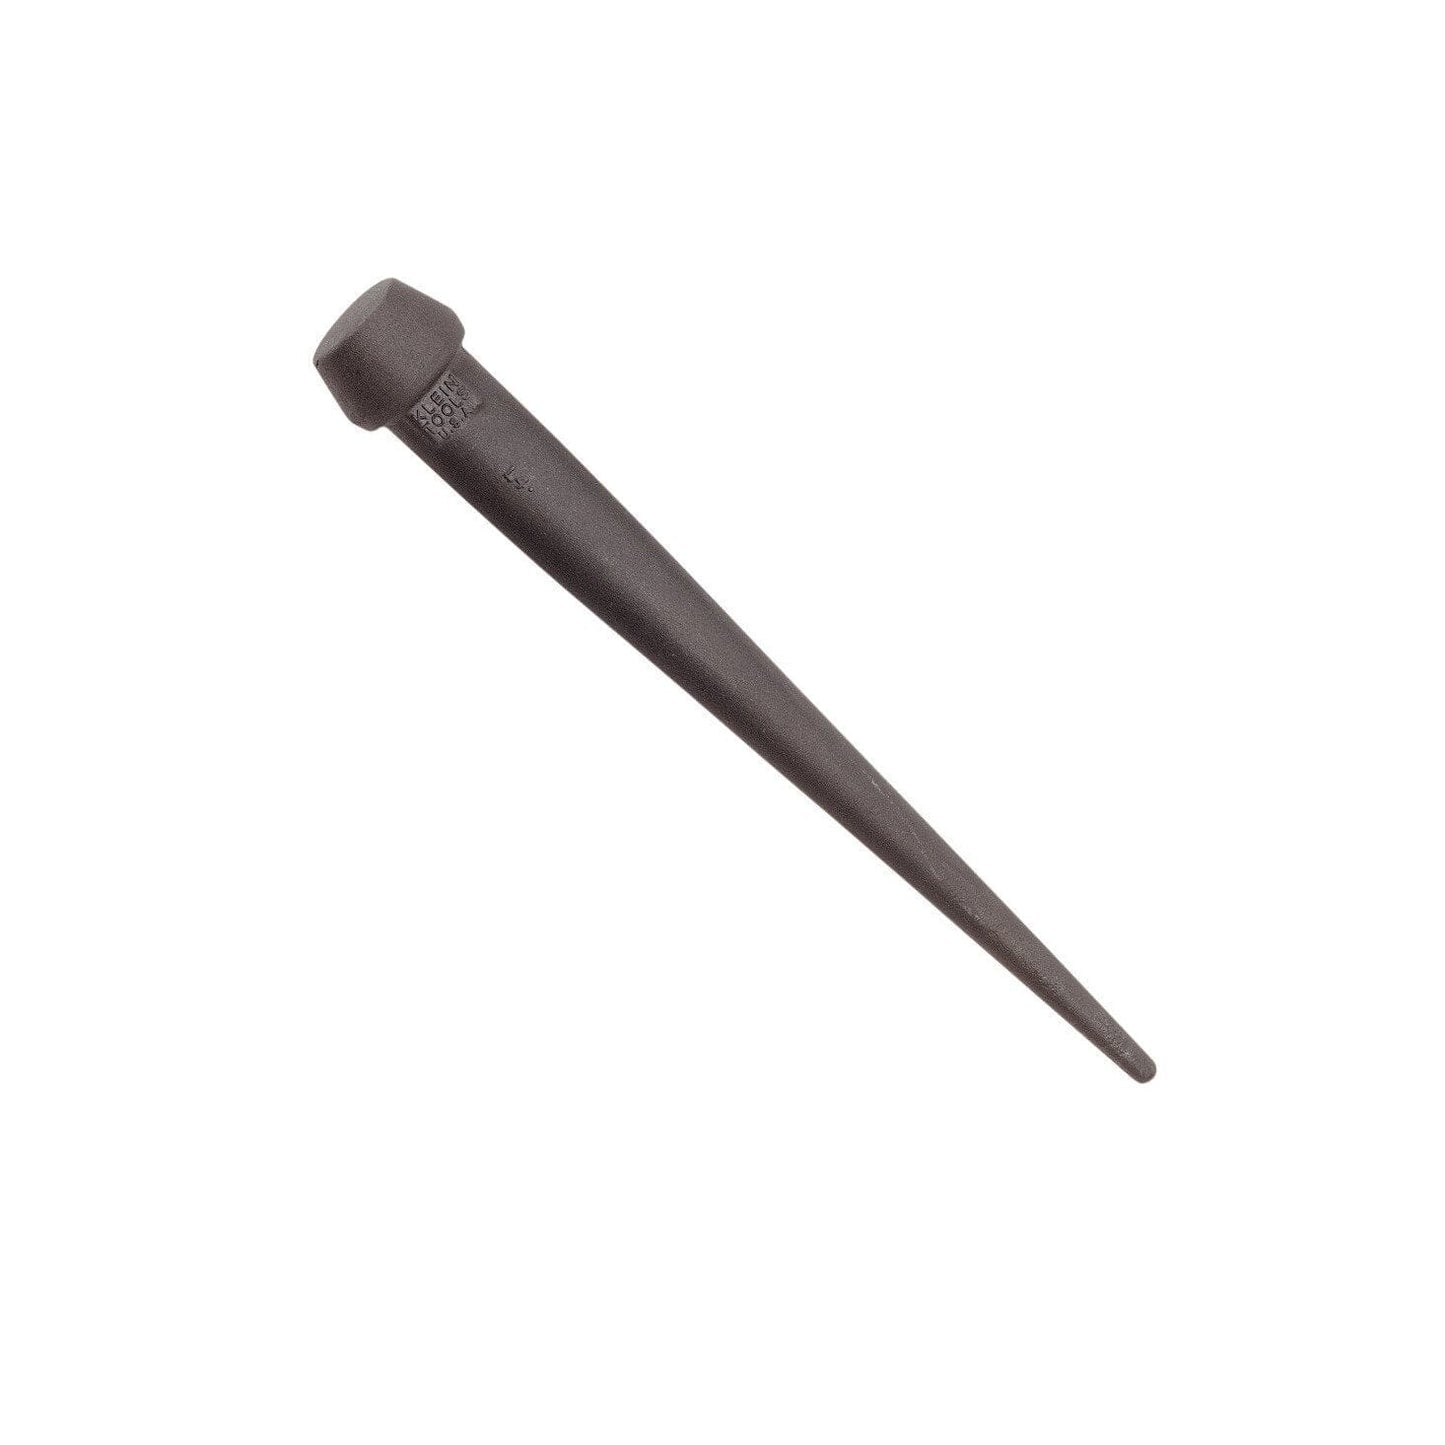 Klein Broad-Head Bull Pin with Tether Hole 1-1/4-Inch - 3255TT Bull Pin Klein Tools 